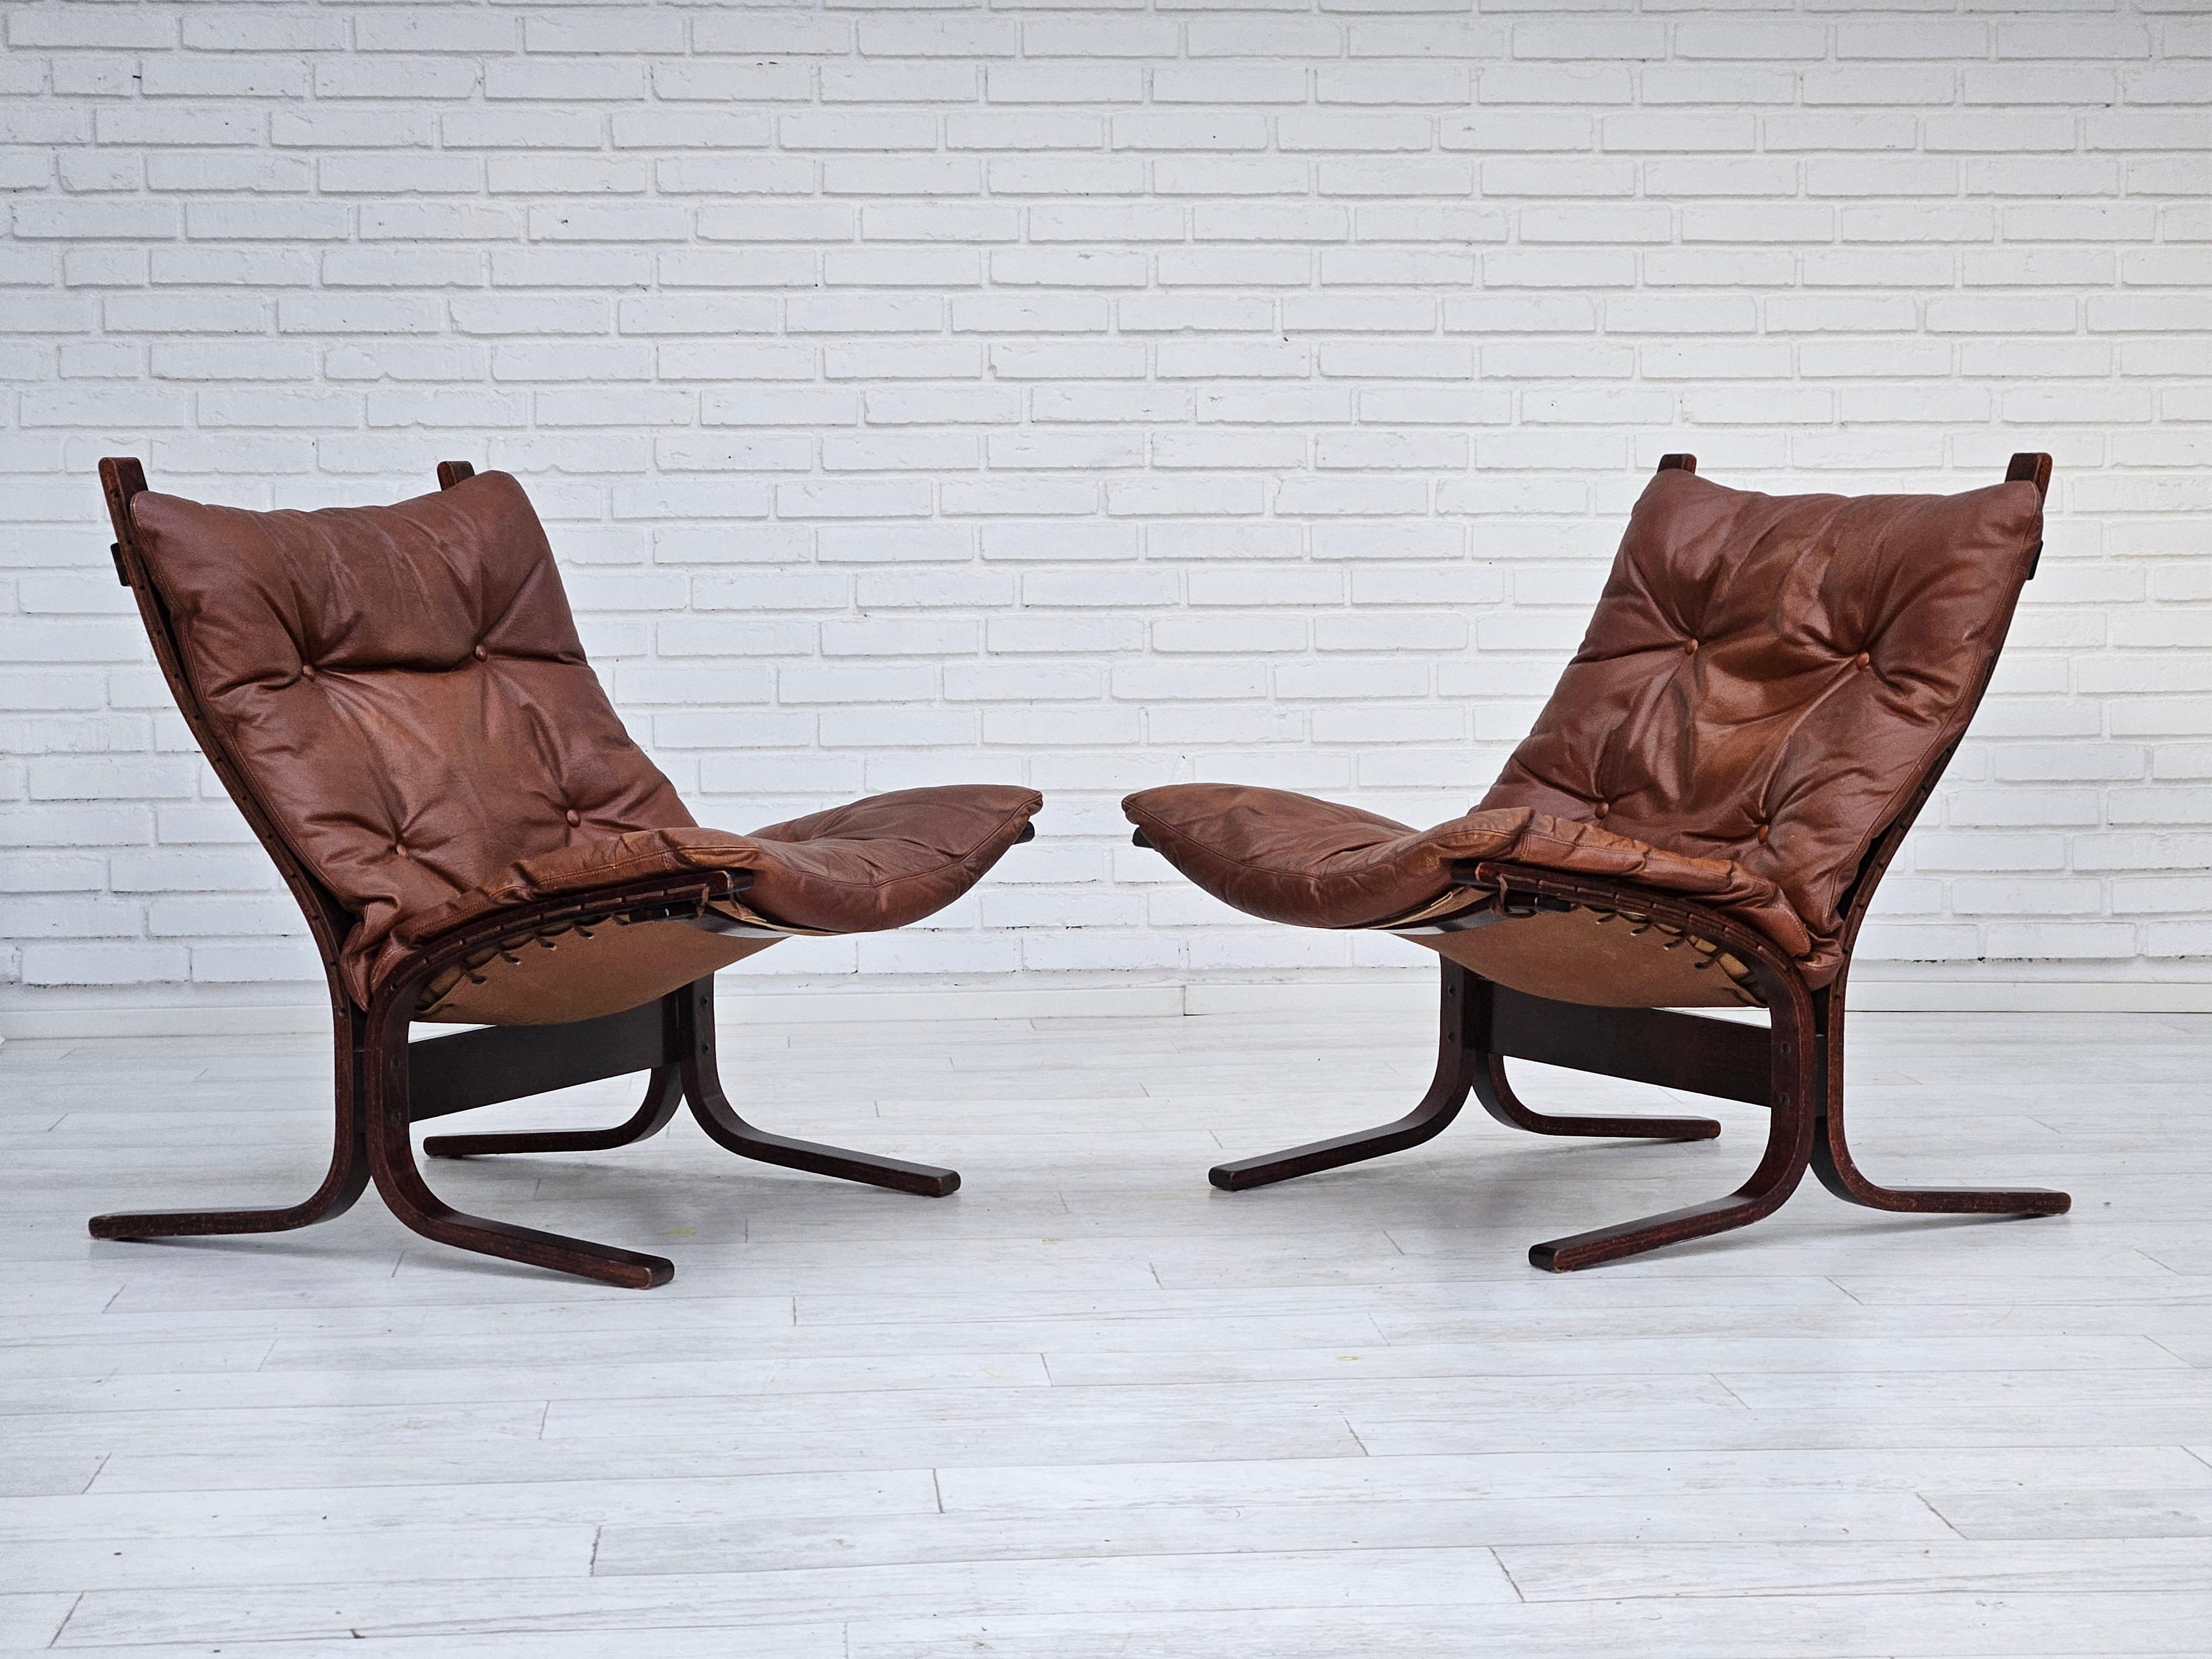 1960-70s, Norwegian design by Ingmar Relling for Westnofa Furniture. Pair of two lounge chairs model 